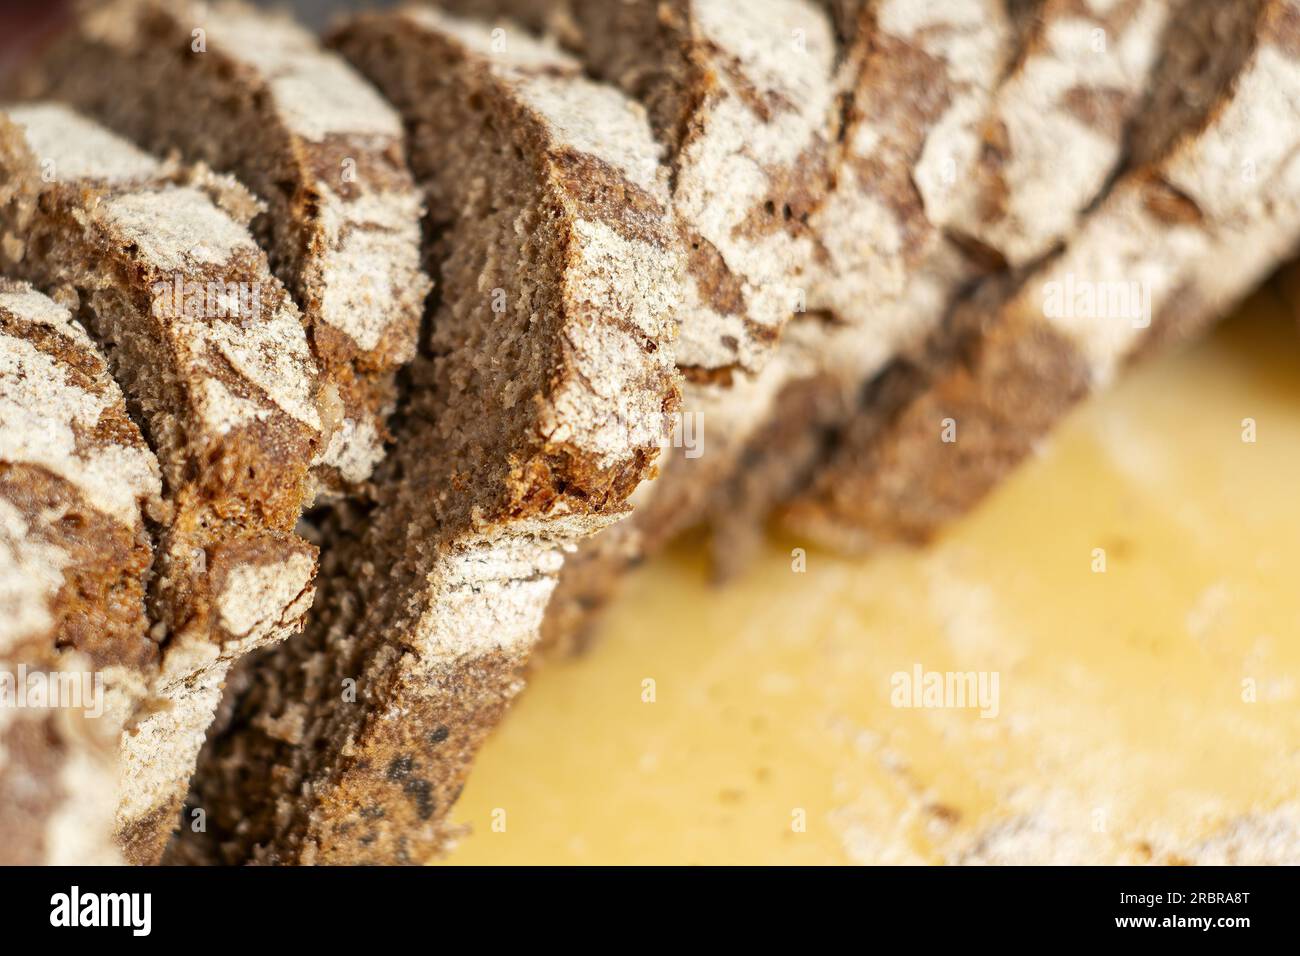 close-up view of some freshly cut slices of whole grain rye bread. Whole grain rye bread is made from all parts of the rye grain and has potential hea Stock Photo